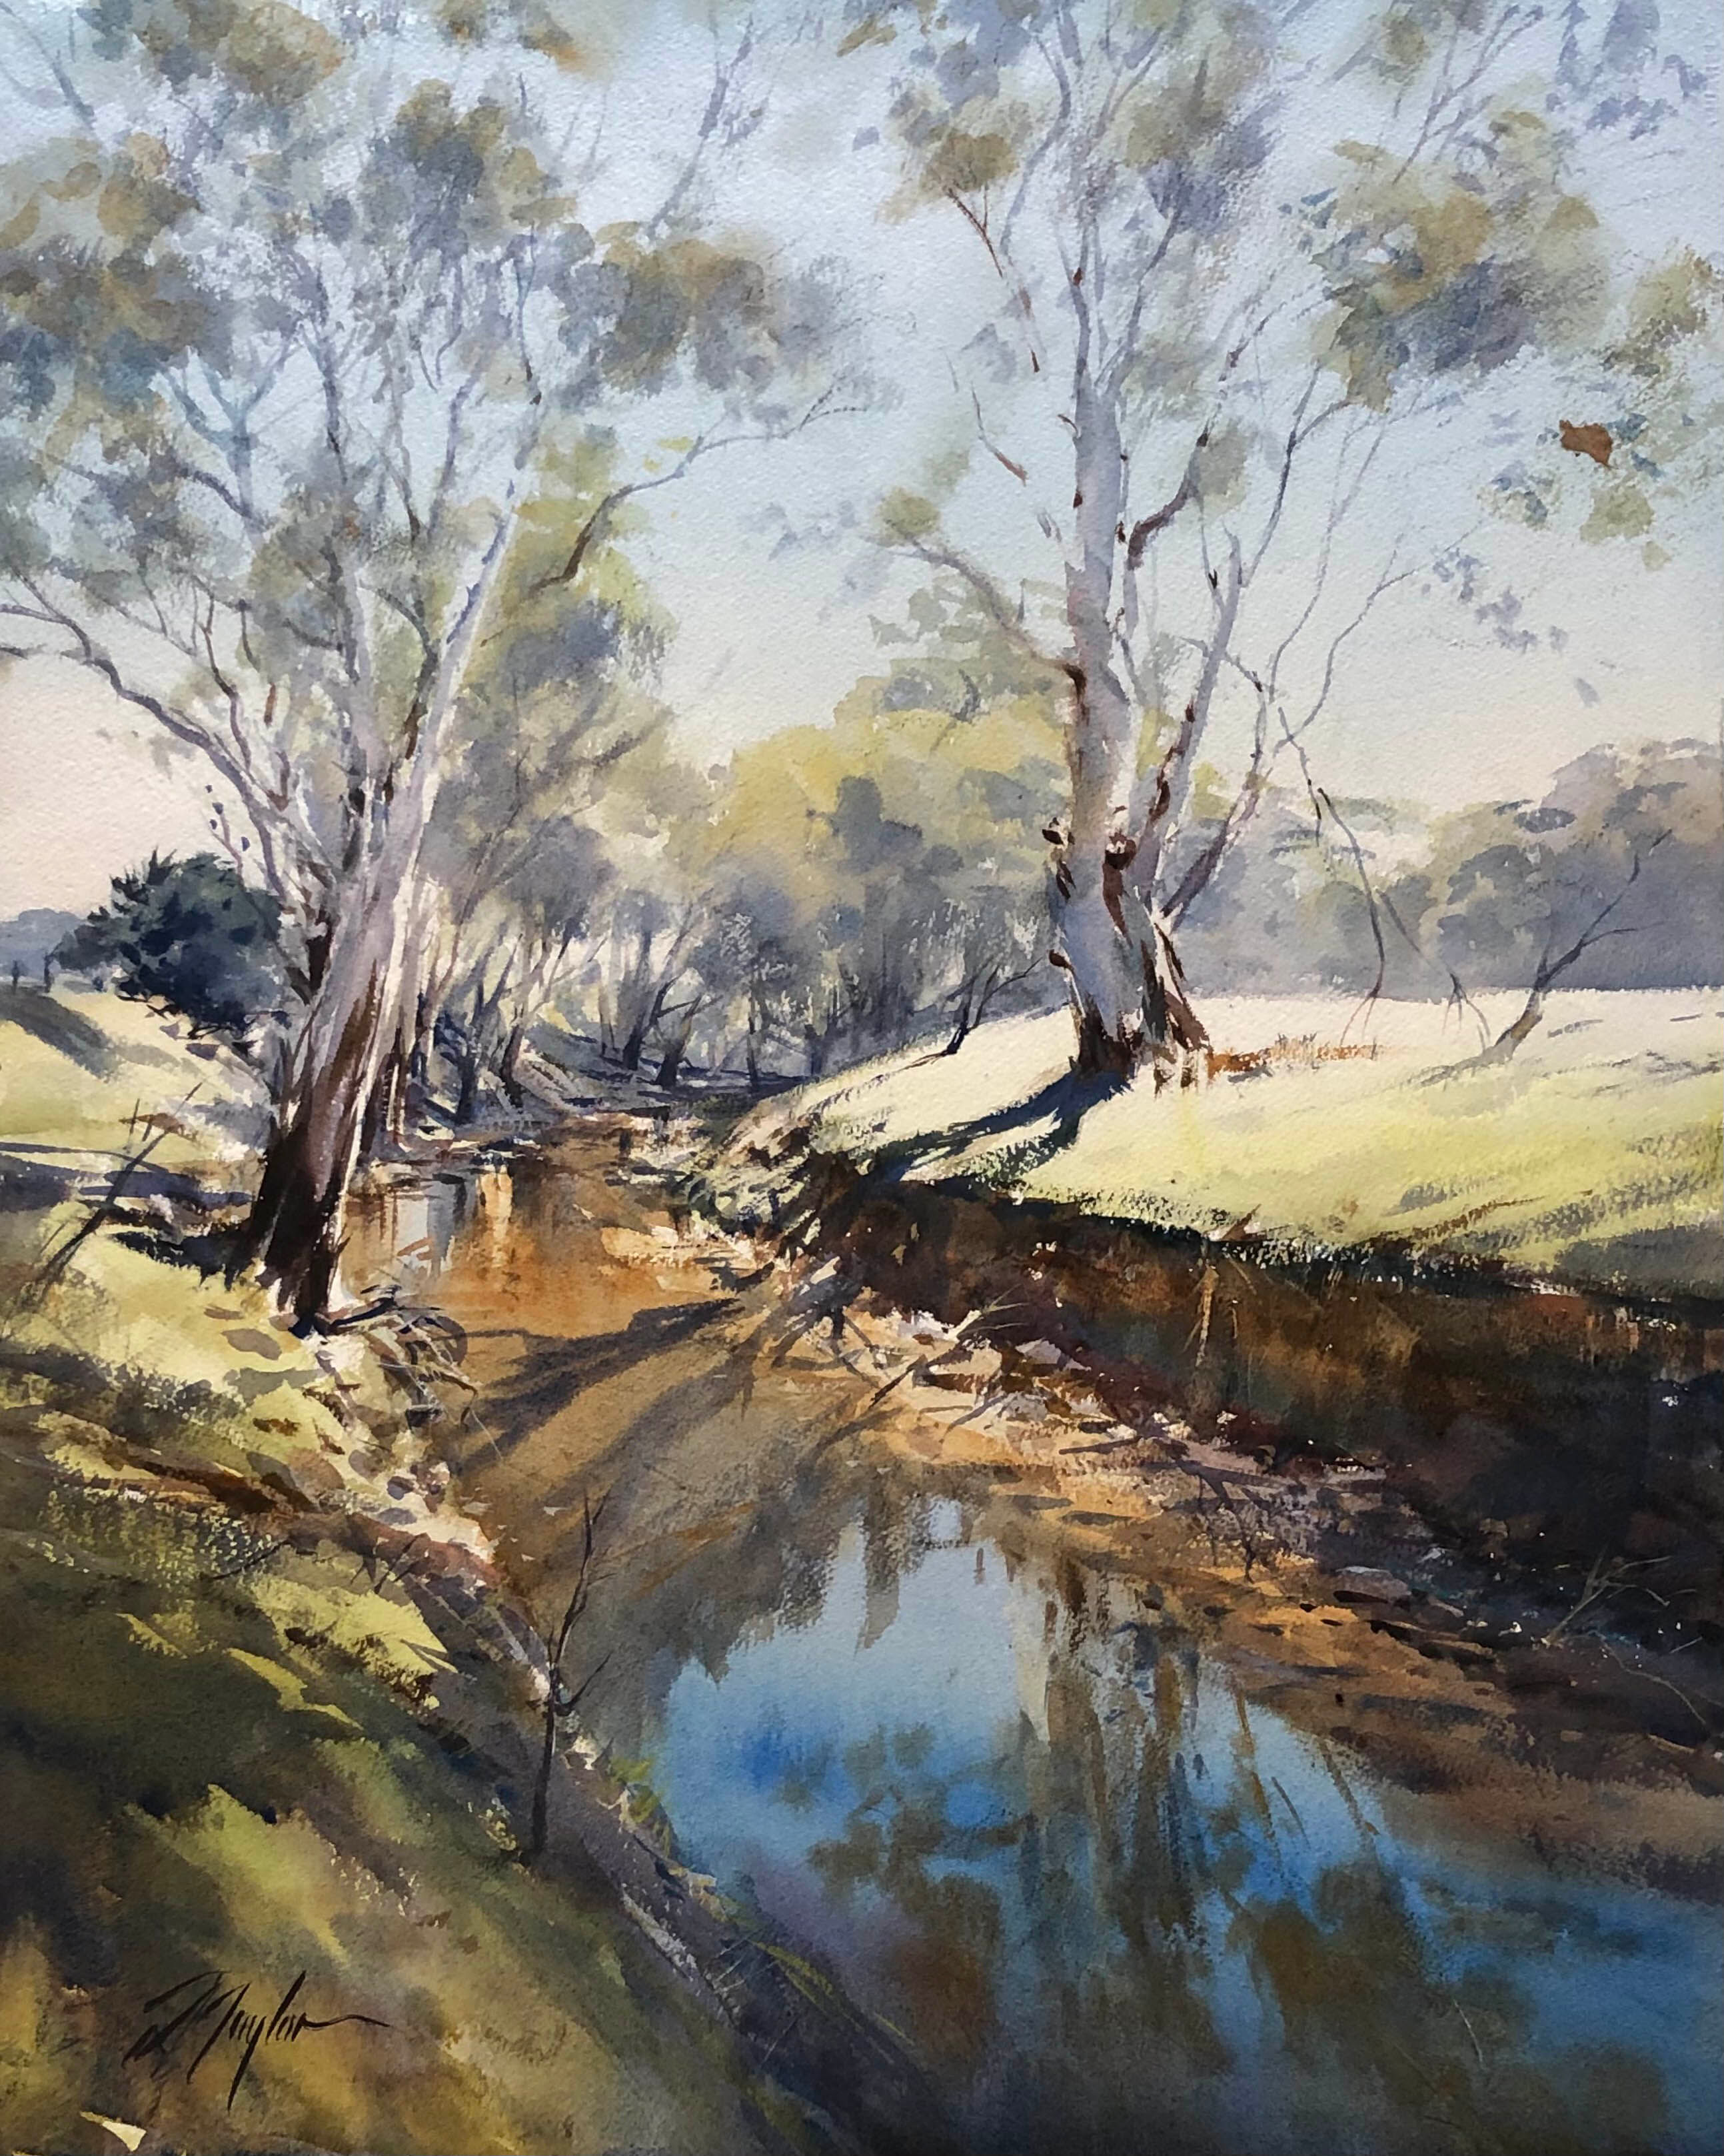 Sun after Frost Bang bang creek By David Taylor A.W.I.F.V.A.S Size 99 cm x 82 cm $4,000